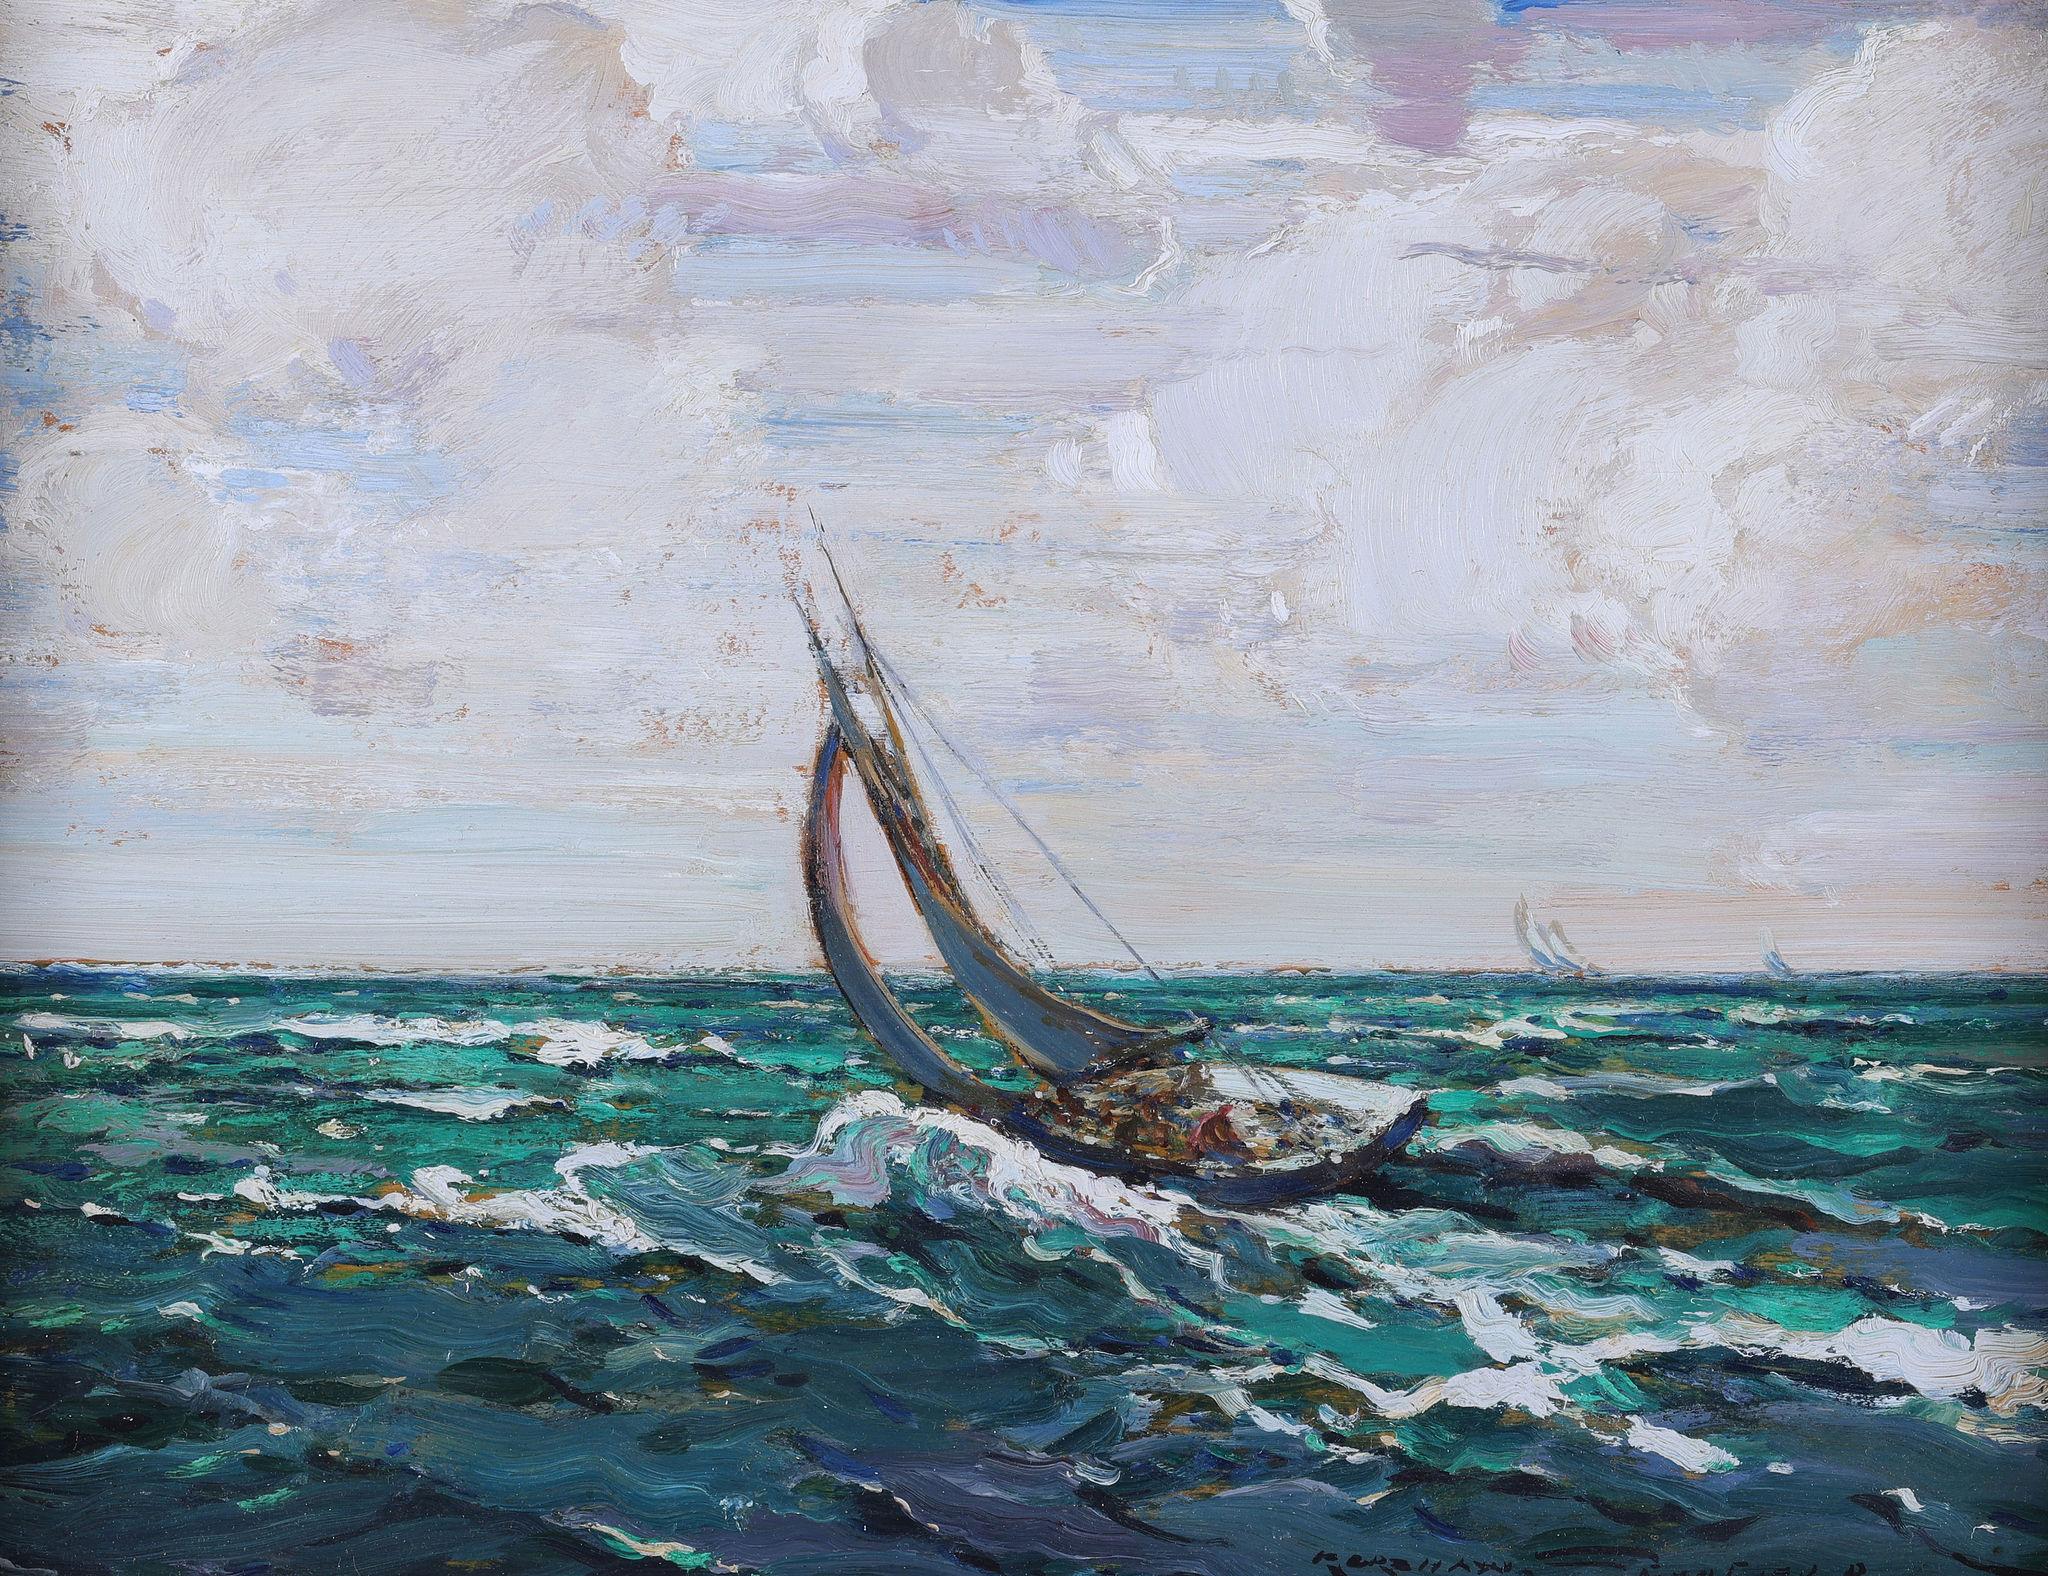 Full Sail . A Boat at Sea - Painting by Kershaw Schofield